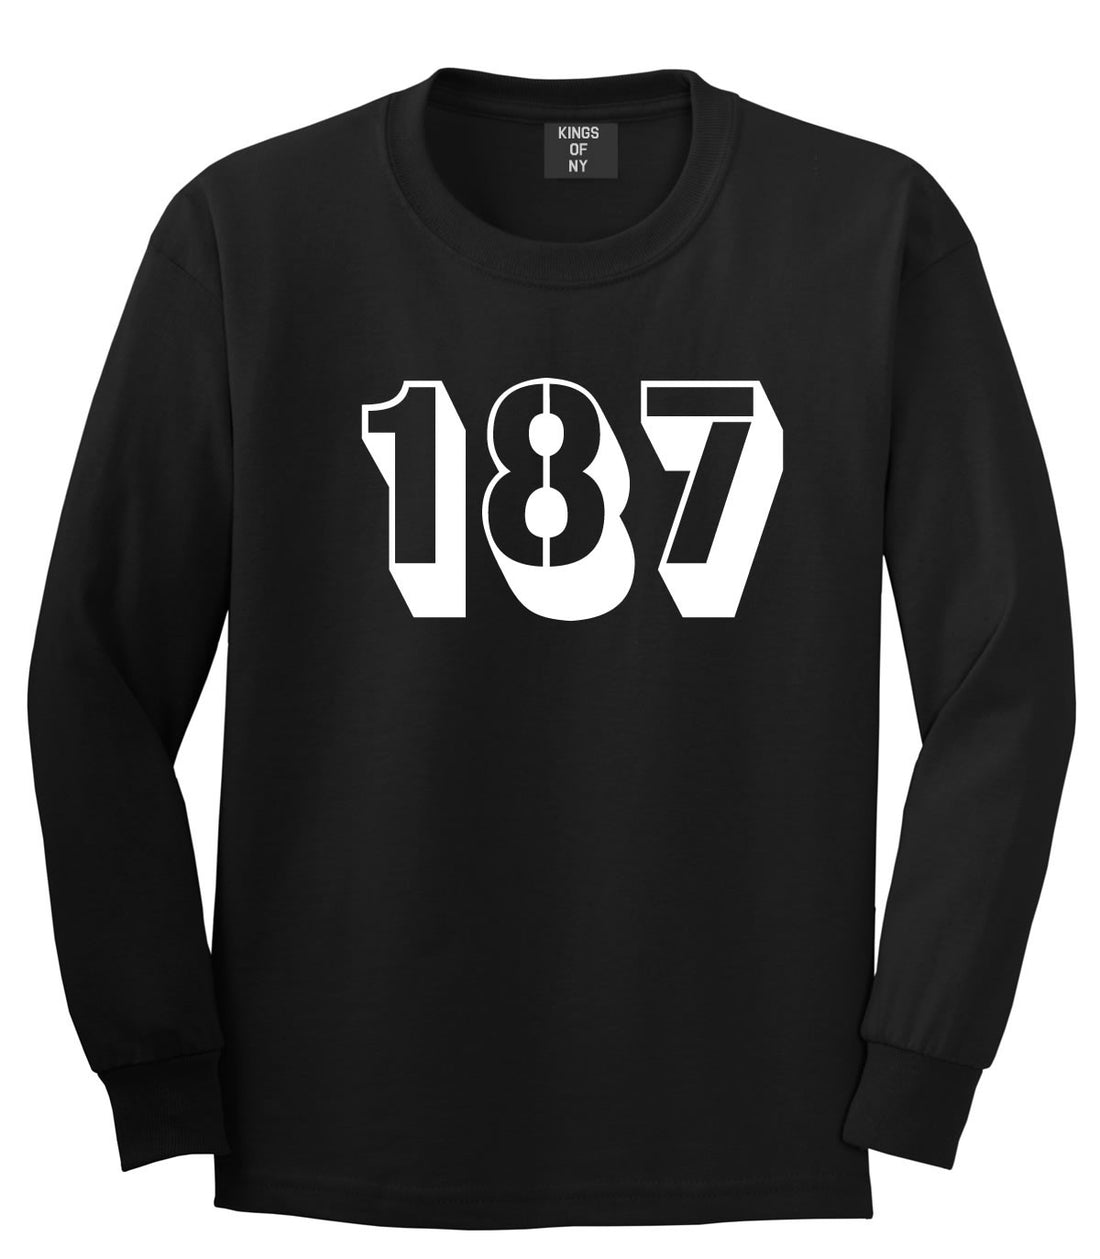 187 Long Sleeve T-Shirt in Black by Kings Of NY